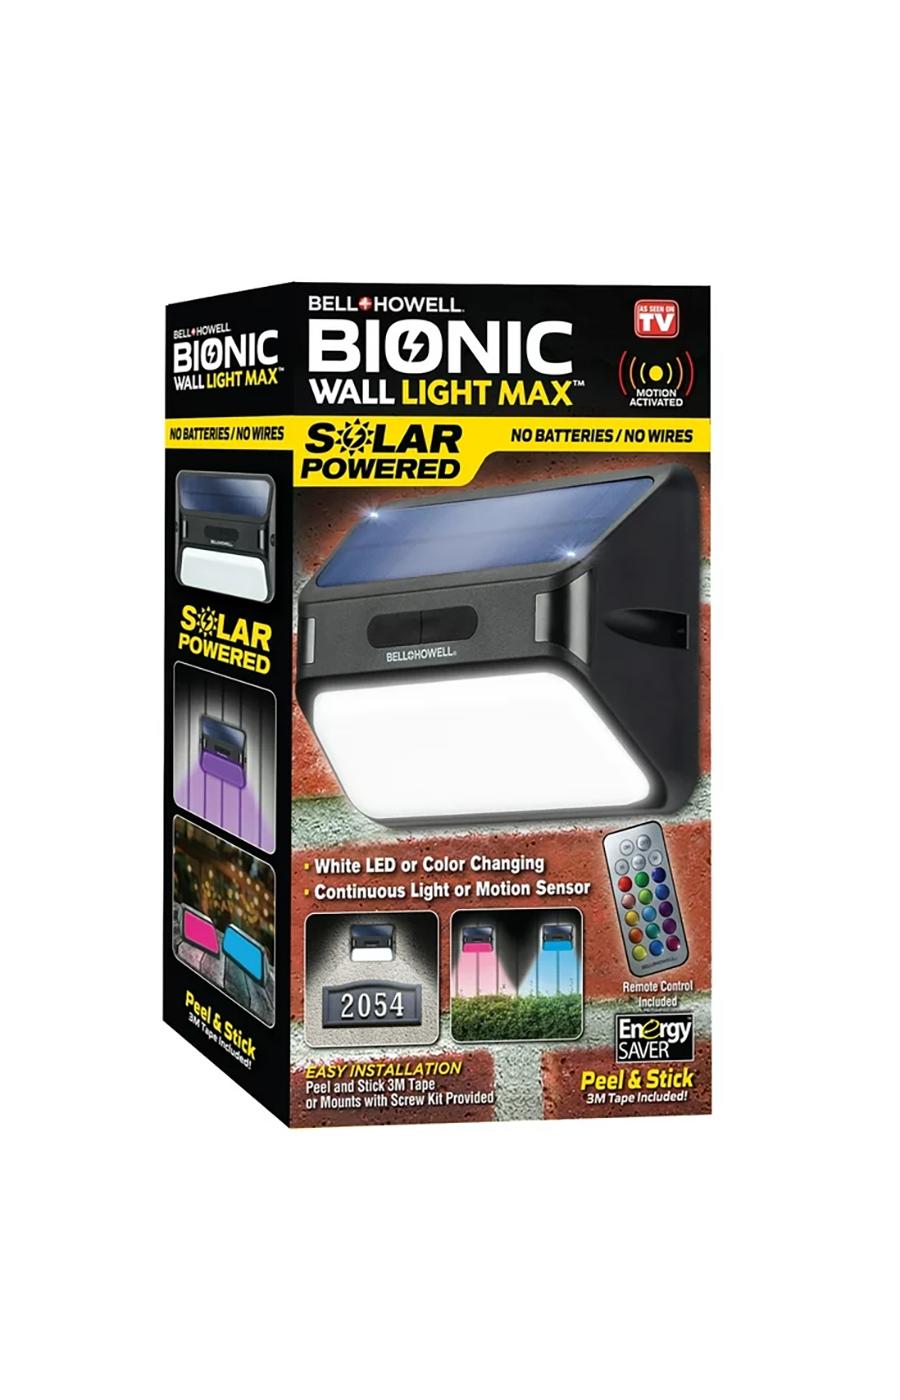 Bell + Howell Bionic Solar Powered Wall Light Max; image 1 of 8